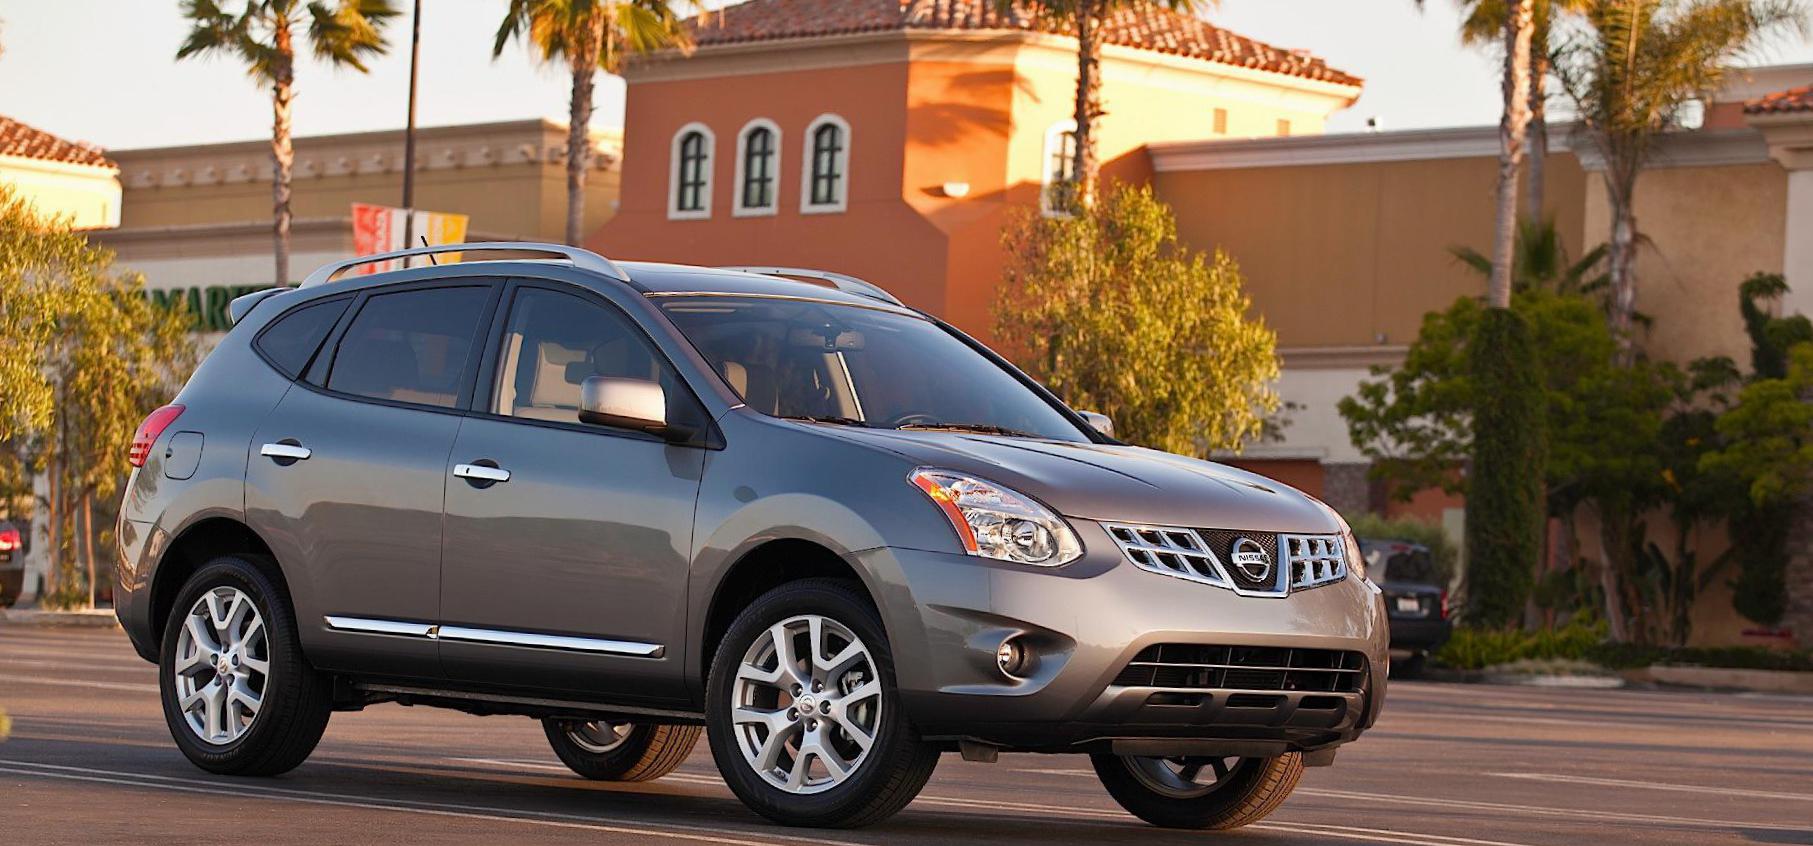 Nissan Rogue approved 2013